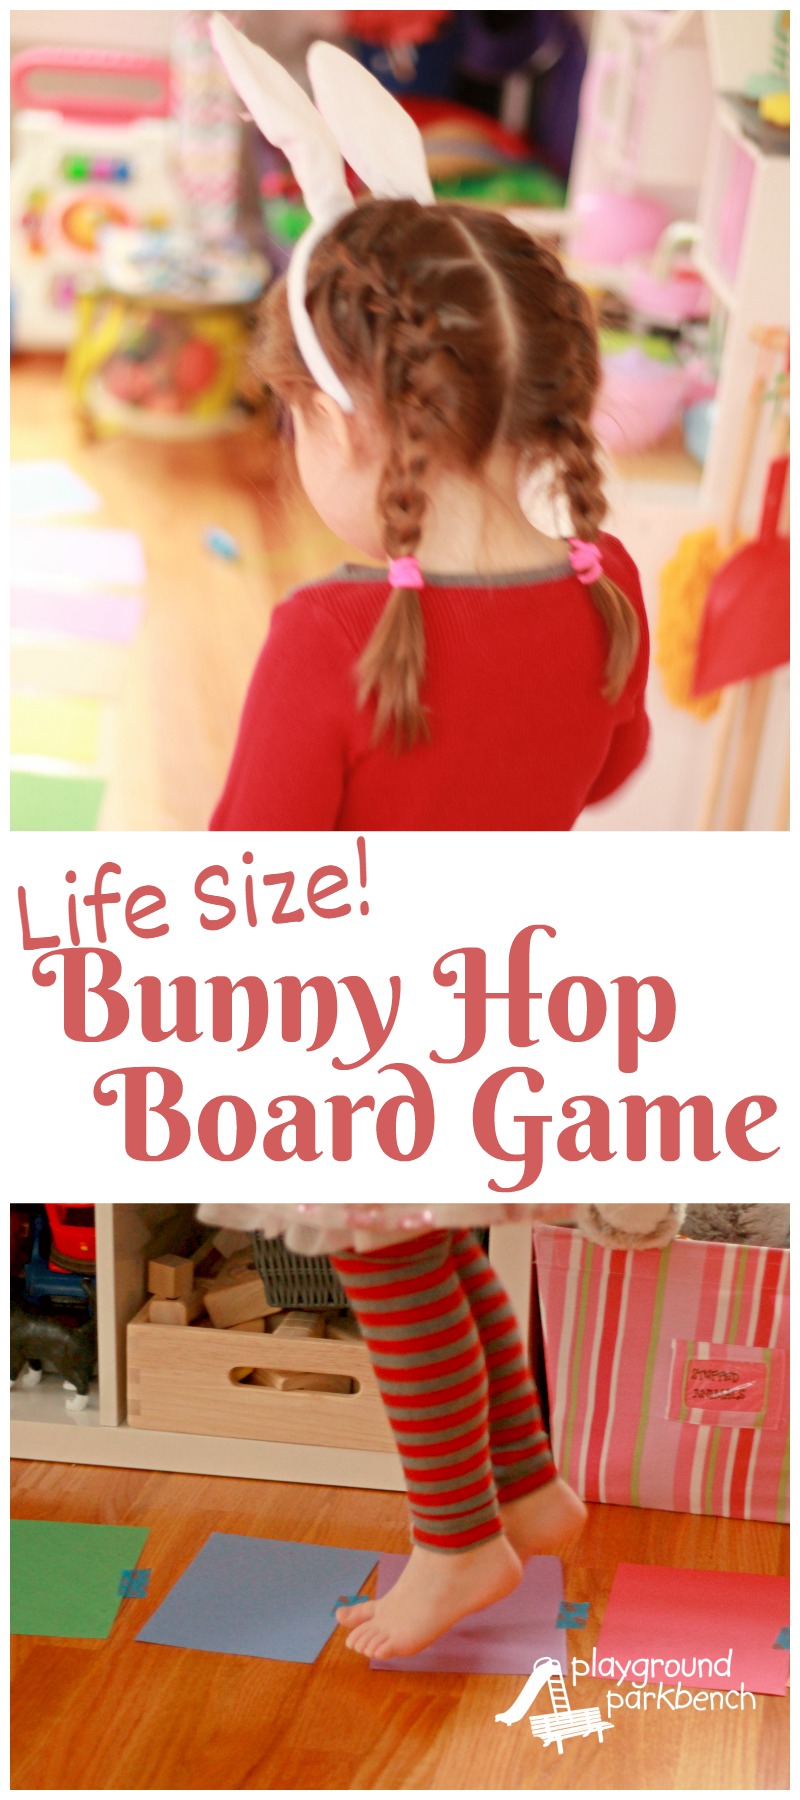 Have indoor fun for Easter with this life-size Bunny Hop Board Game. Teach your toddler or preschooler color recognition, patterns, and get out all that Easter candy sugar high with this active indoor activity!